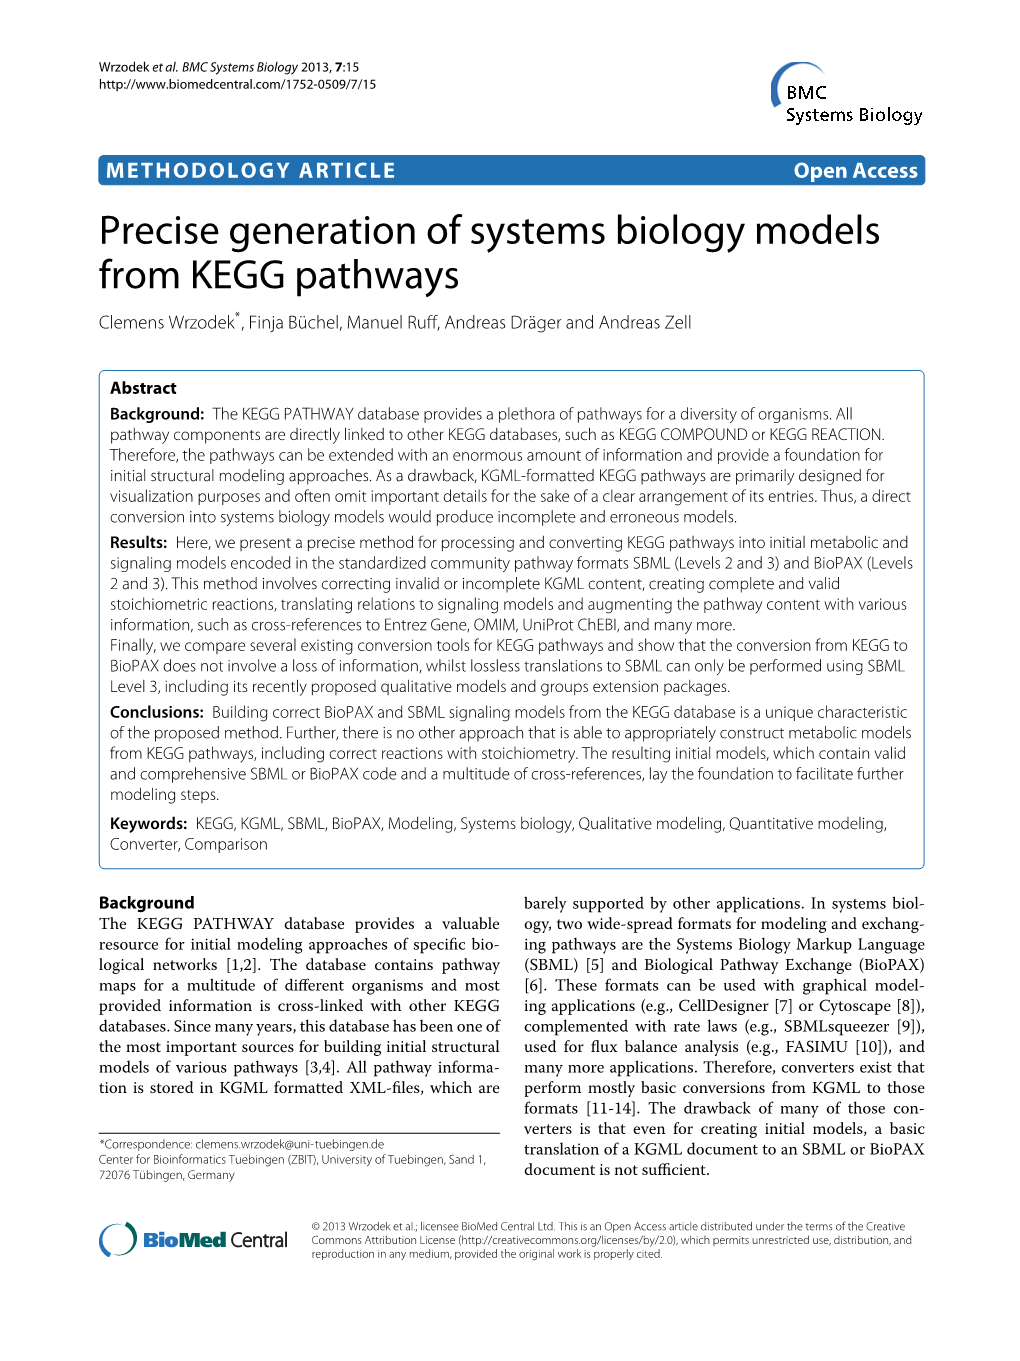 Precise Generation of Systems Biology Models from KEGG Pathways Clemens Wrzodek*,Finjabuchel,¨ Manuel Ruﬀ, Andreas Drager¨ and Andreas Zell